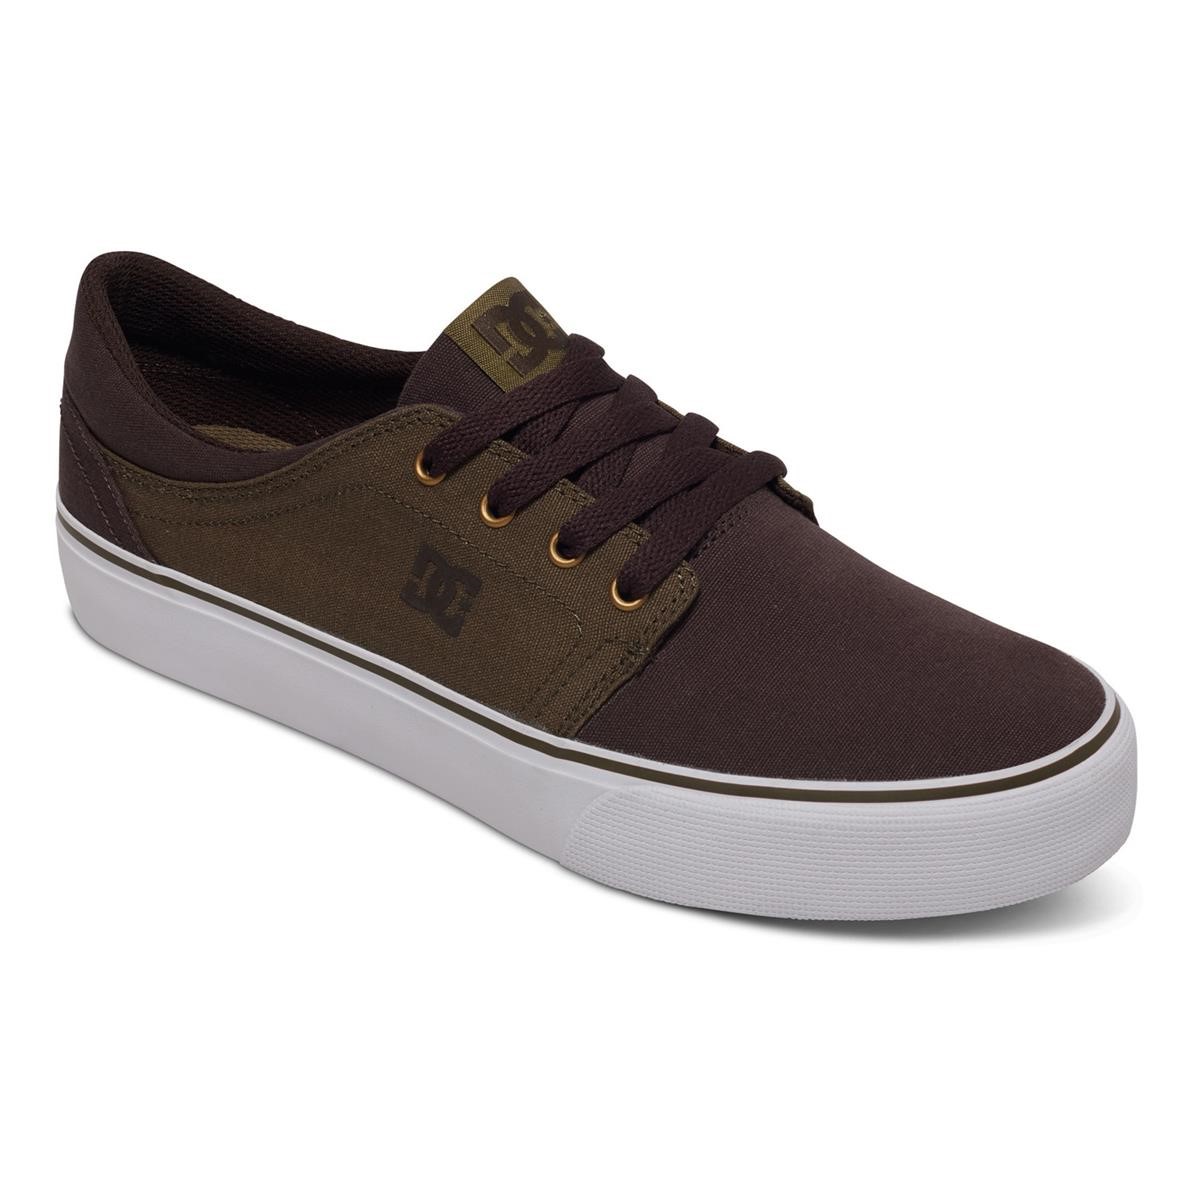 DC shoes Trase TX Military/Dark Chocolate